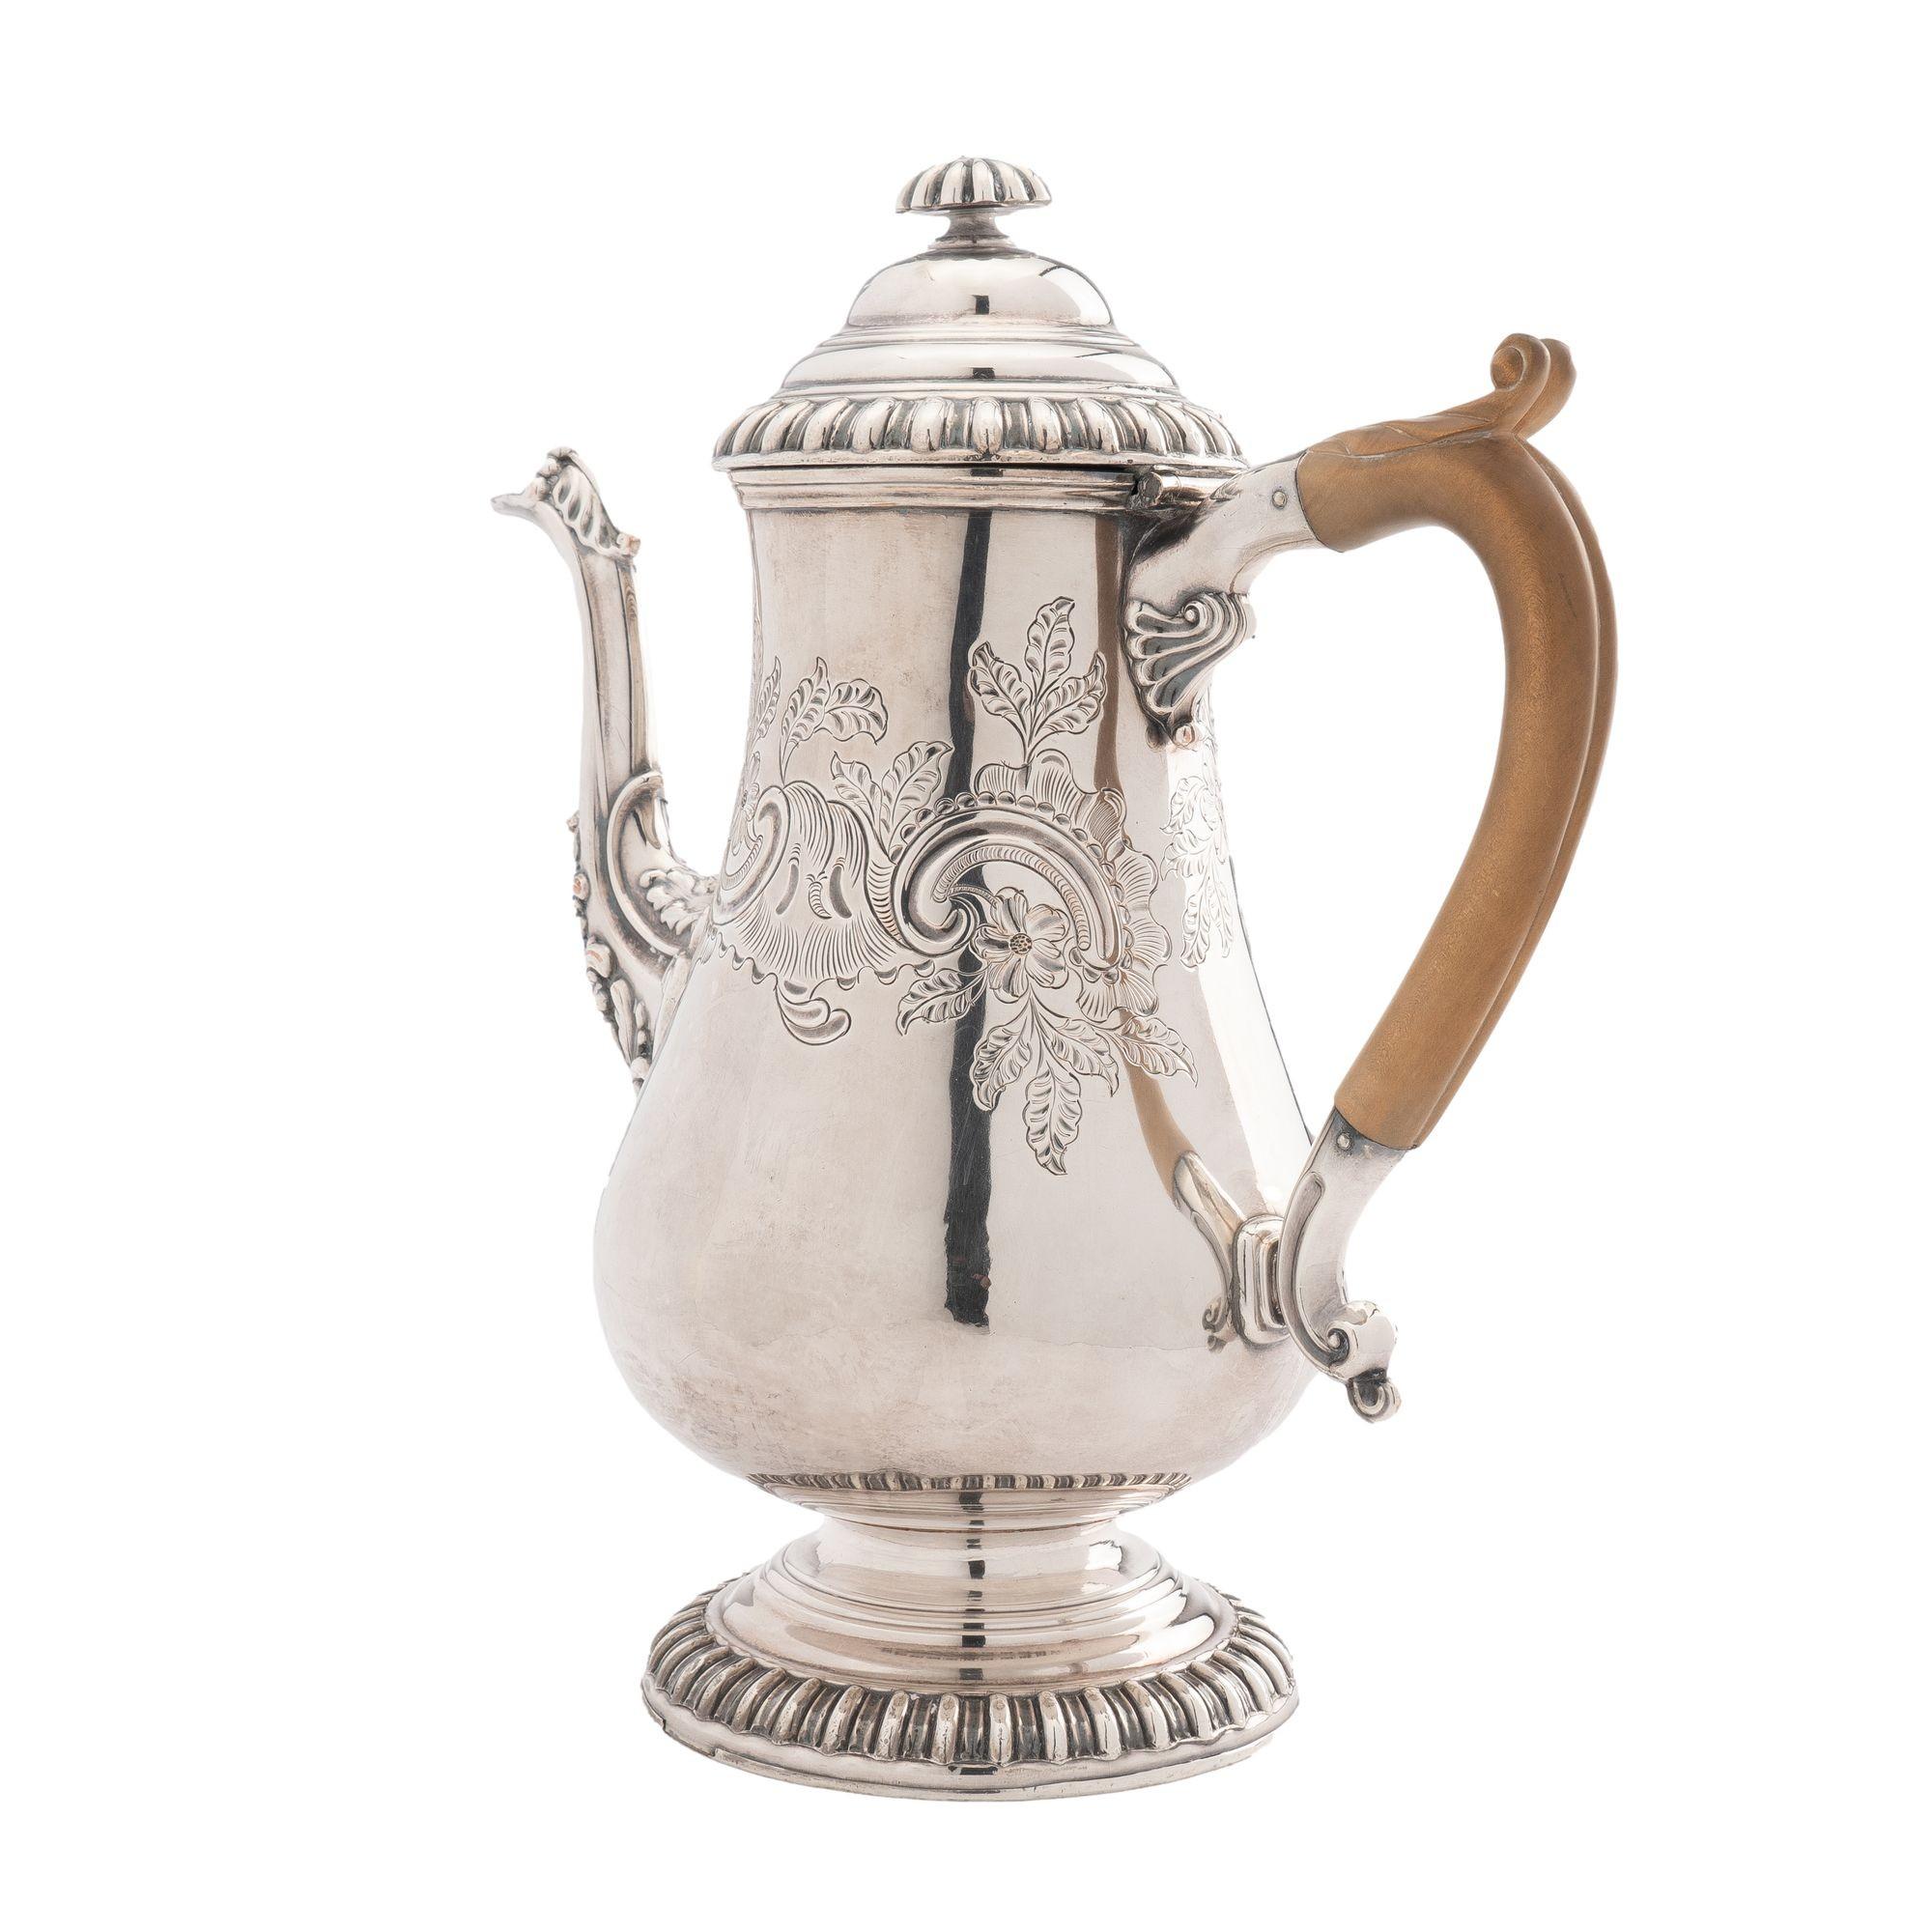 English Old Sheffield Rococo pyriform coffee pot with carved boxwood handle. The foot, lid rim, and lid finial are cast in a reel molding. Rococo engraving and developed Rococo spout are indicative of its mid 18th Century English